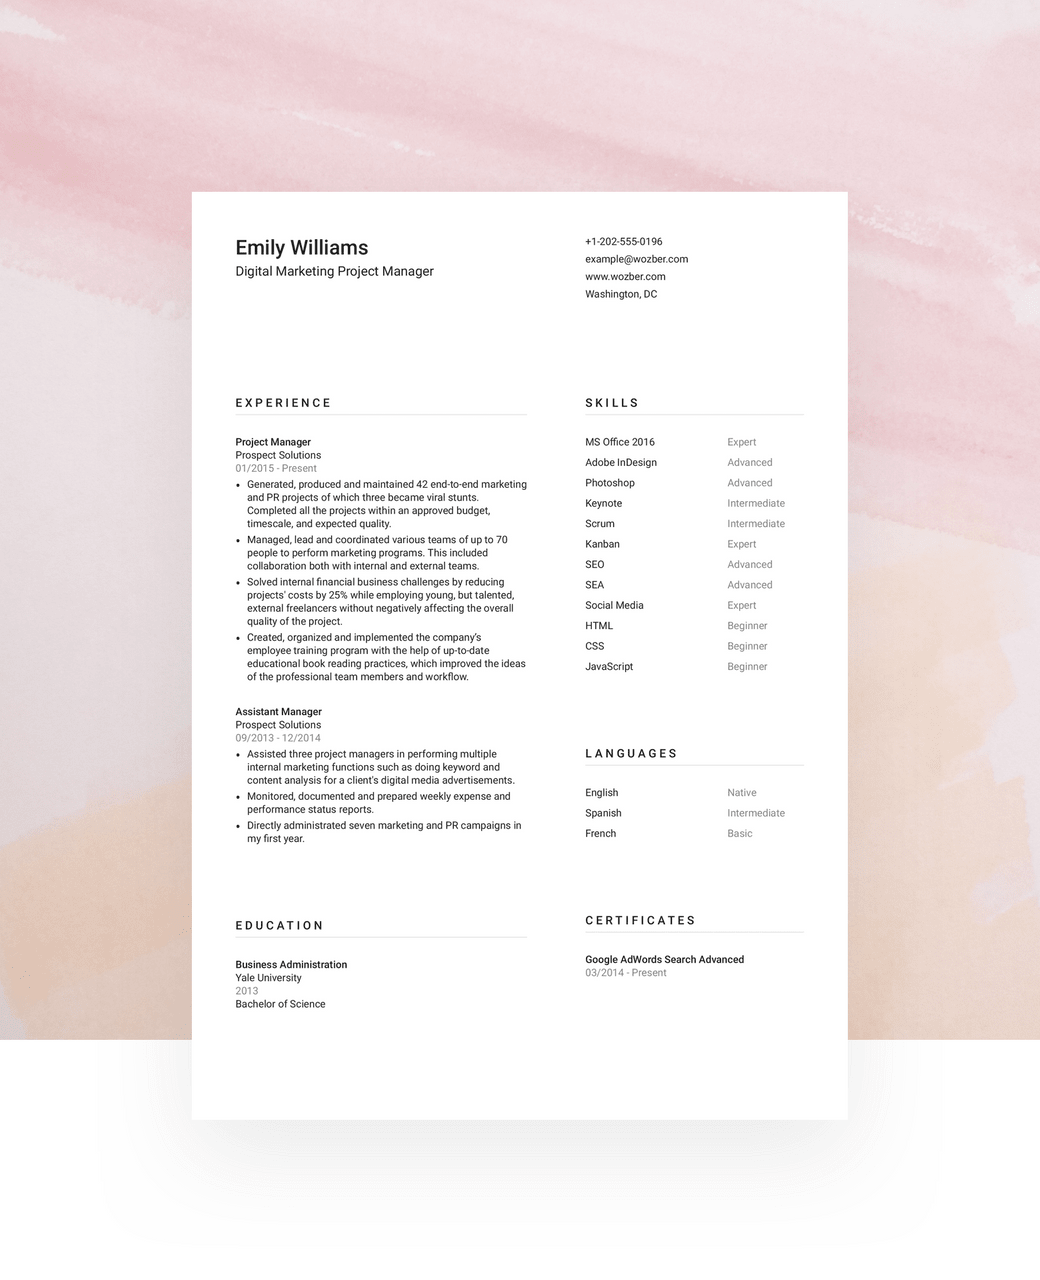 A two-column resume template with minimalistic design for professionals who seek to fit more content into one page.